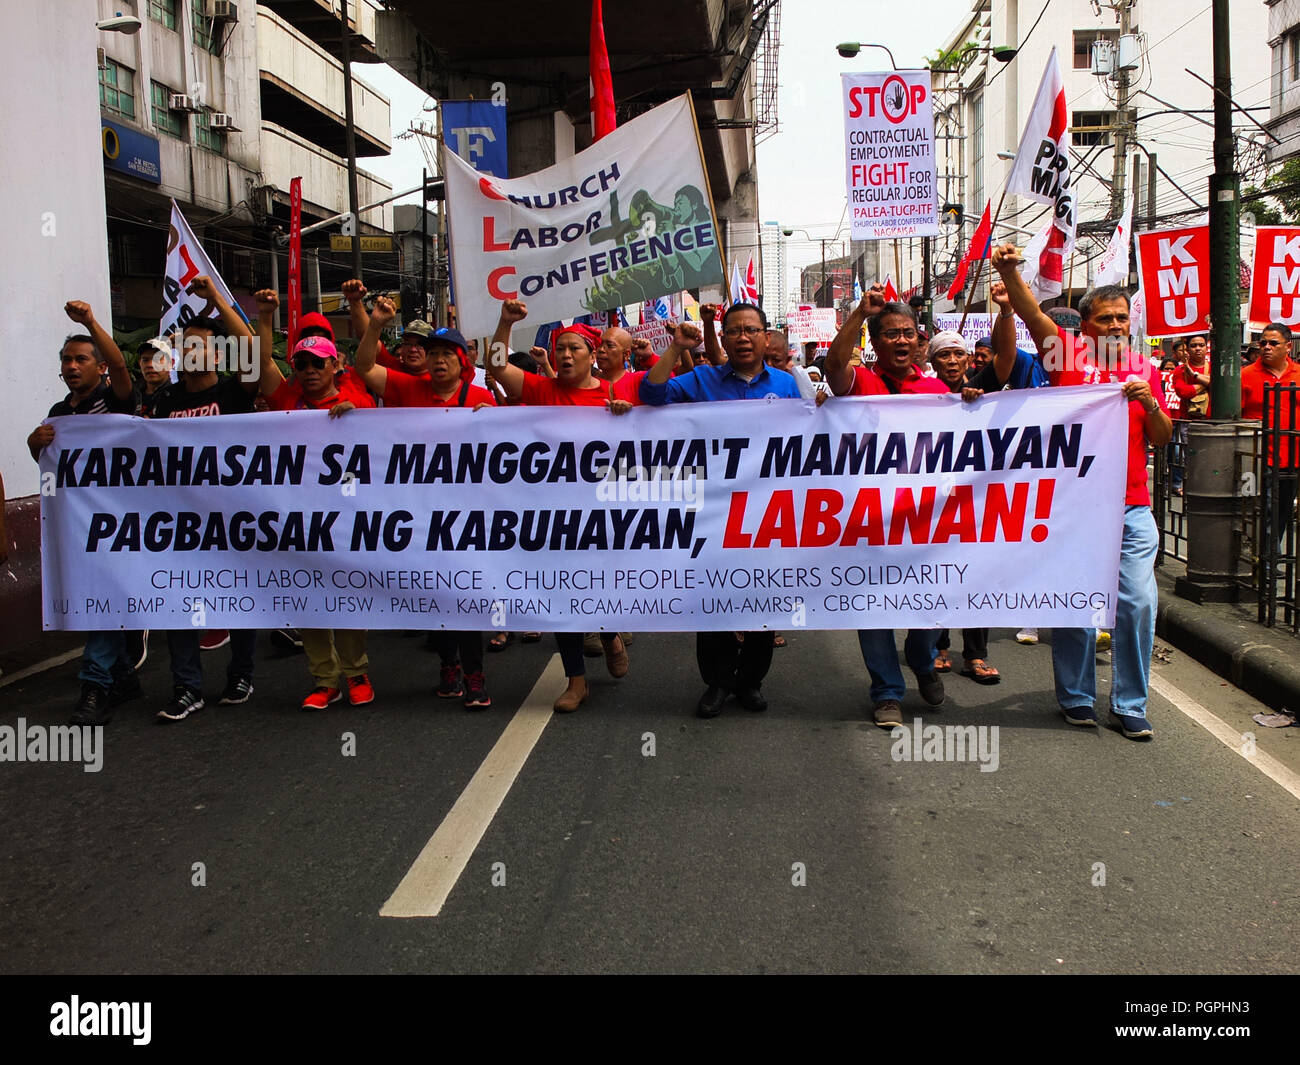 Manila, Philippines. 7th Feb, 2013. Protesters marching along Recto Avenue, going to Mendiola in Manila.Labor Union from different business sectors leads National Heroes' Day march to Mendiola. Labor coalitions will mark National Heroes' Day on Monday by protesting the Duterte administration's alleged failure to address workers' issues. Credit: Josefiel Rivera/SOPA Images/ZUMA Wire/Alamy Live News Stock Photo